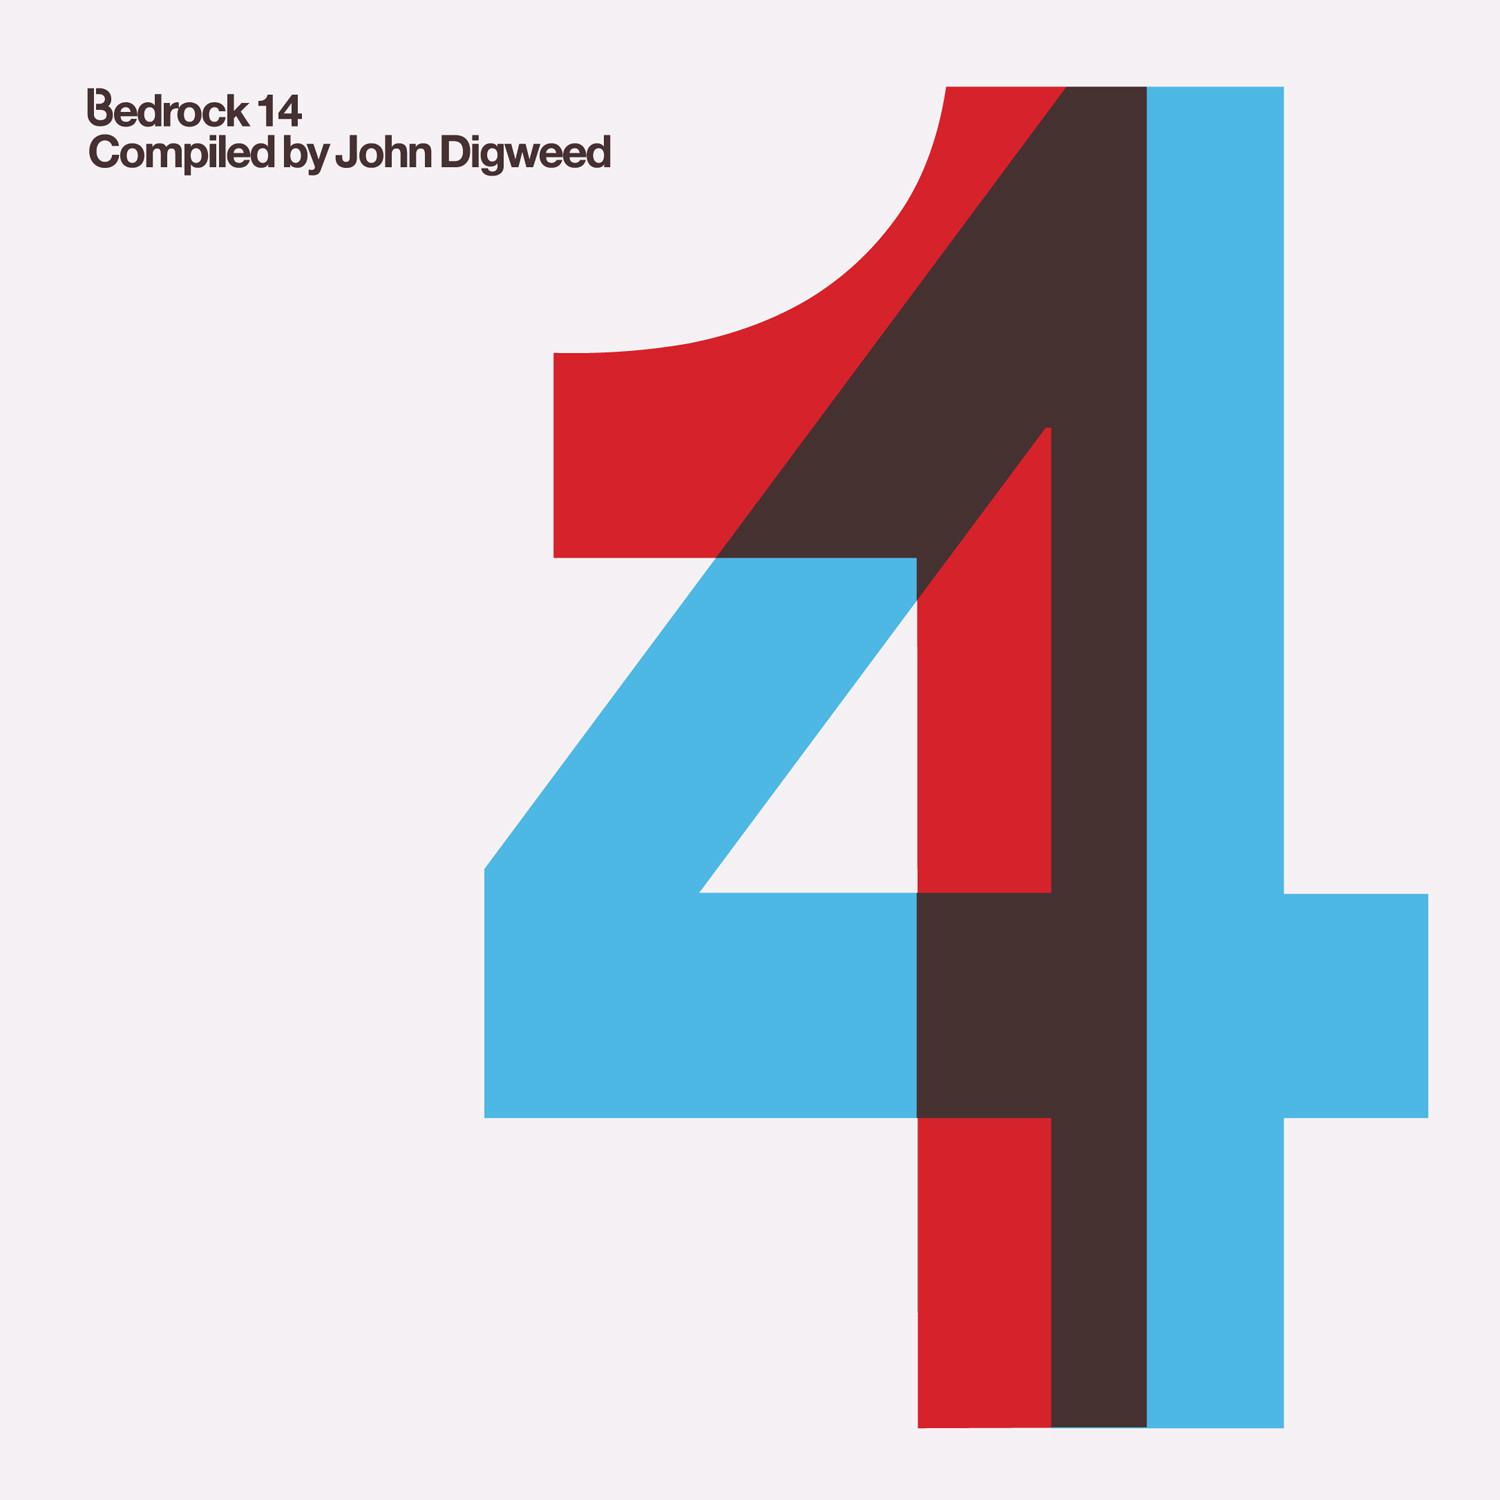 Bedrock 14 Compiled by John Digweed